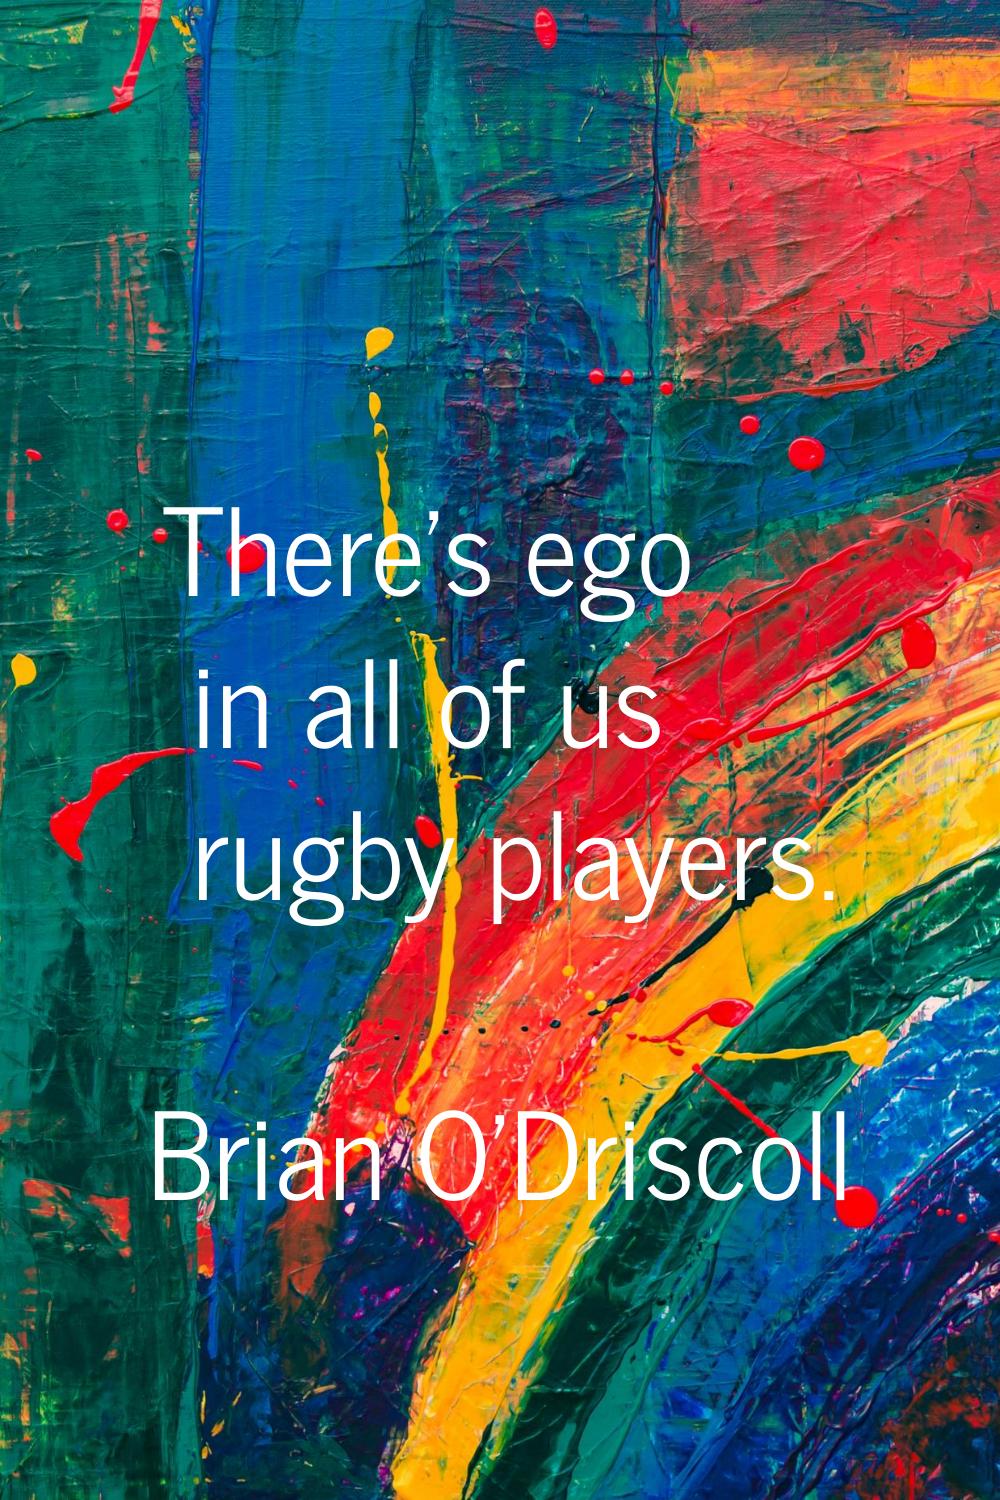 There's ego in all of us rugby players.